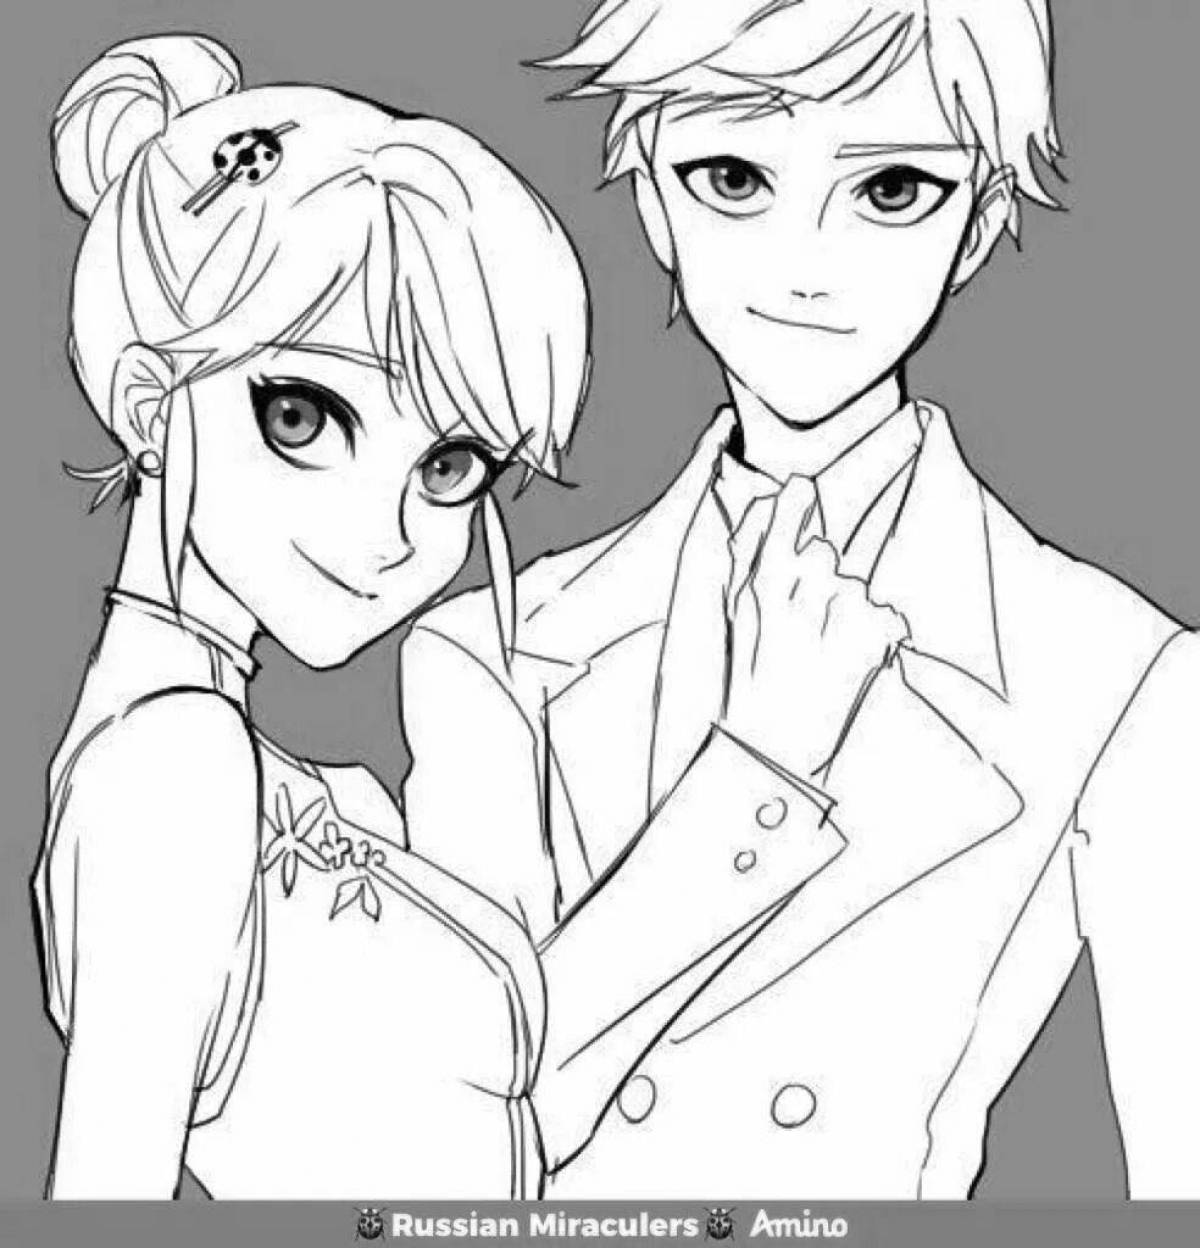 Marinette and Adrian funny coloring book